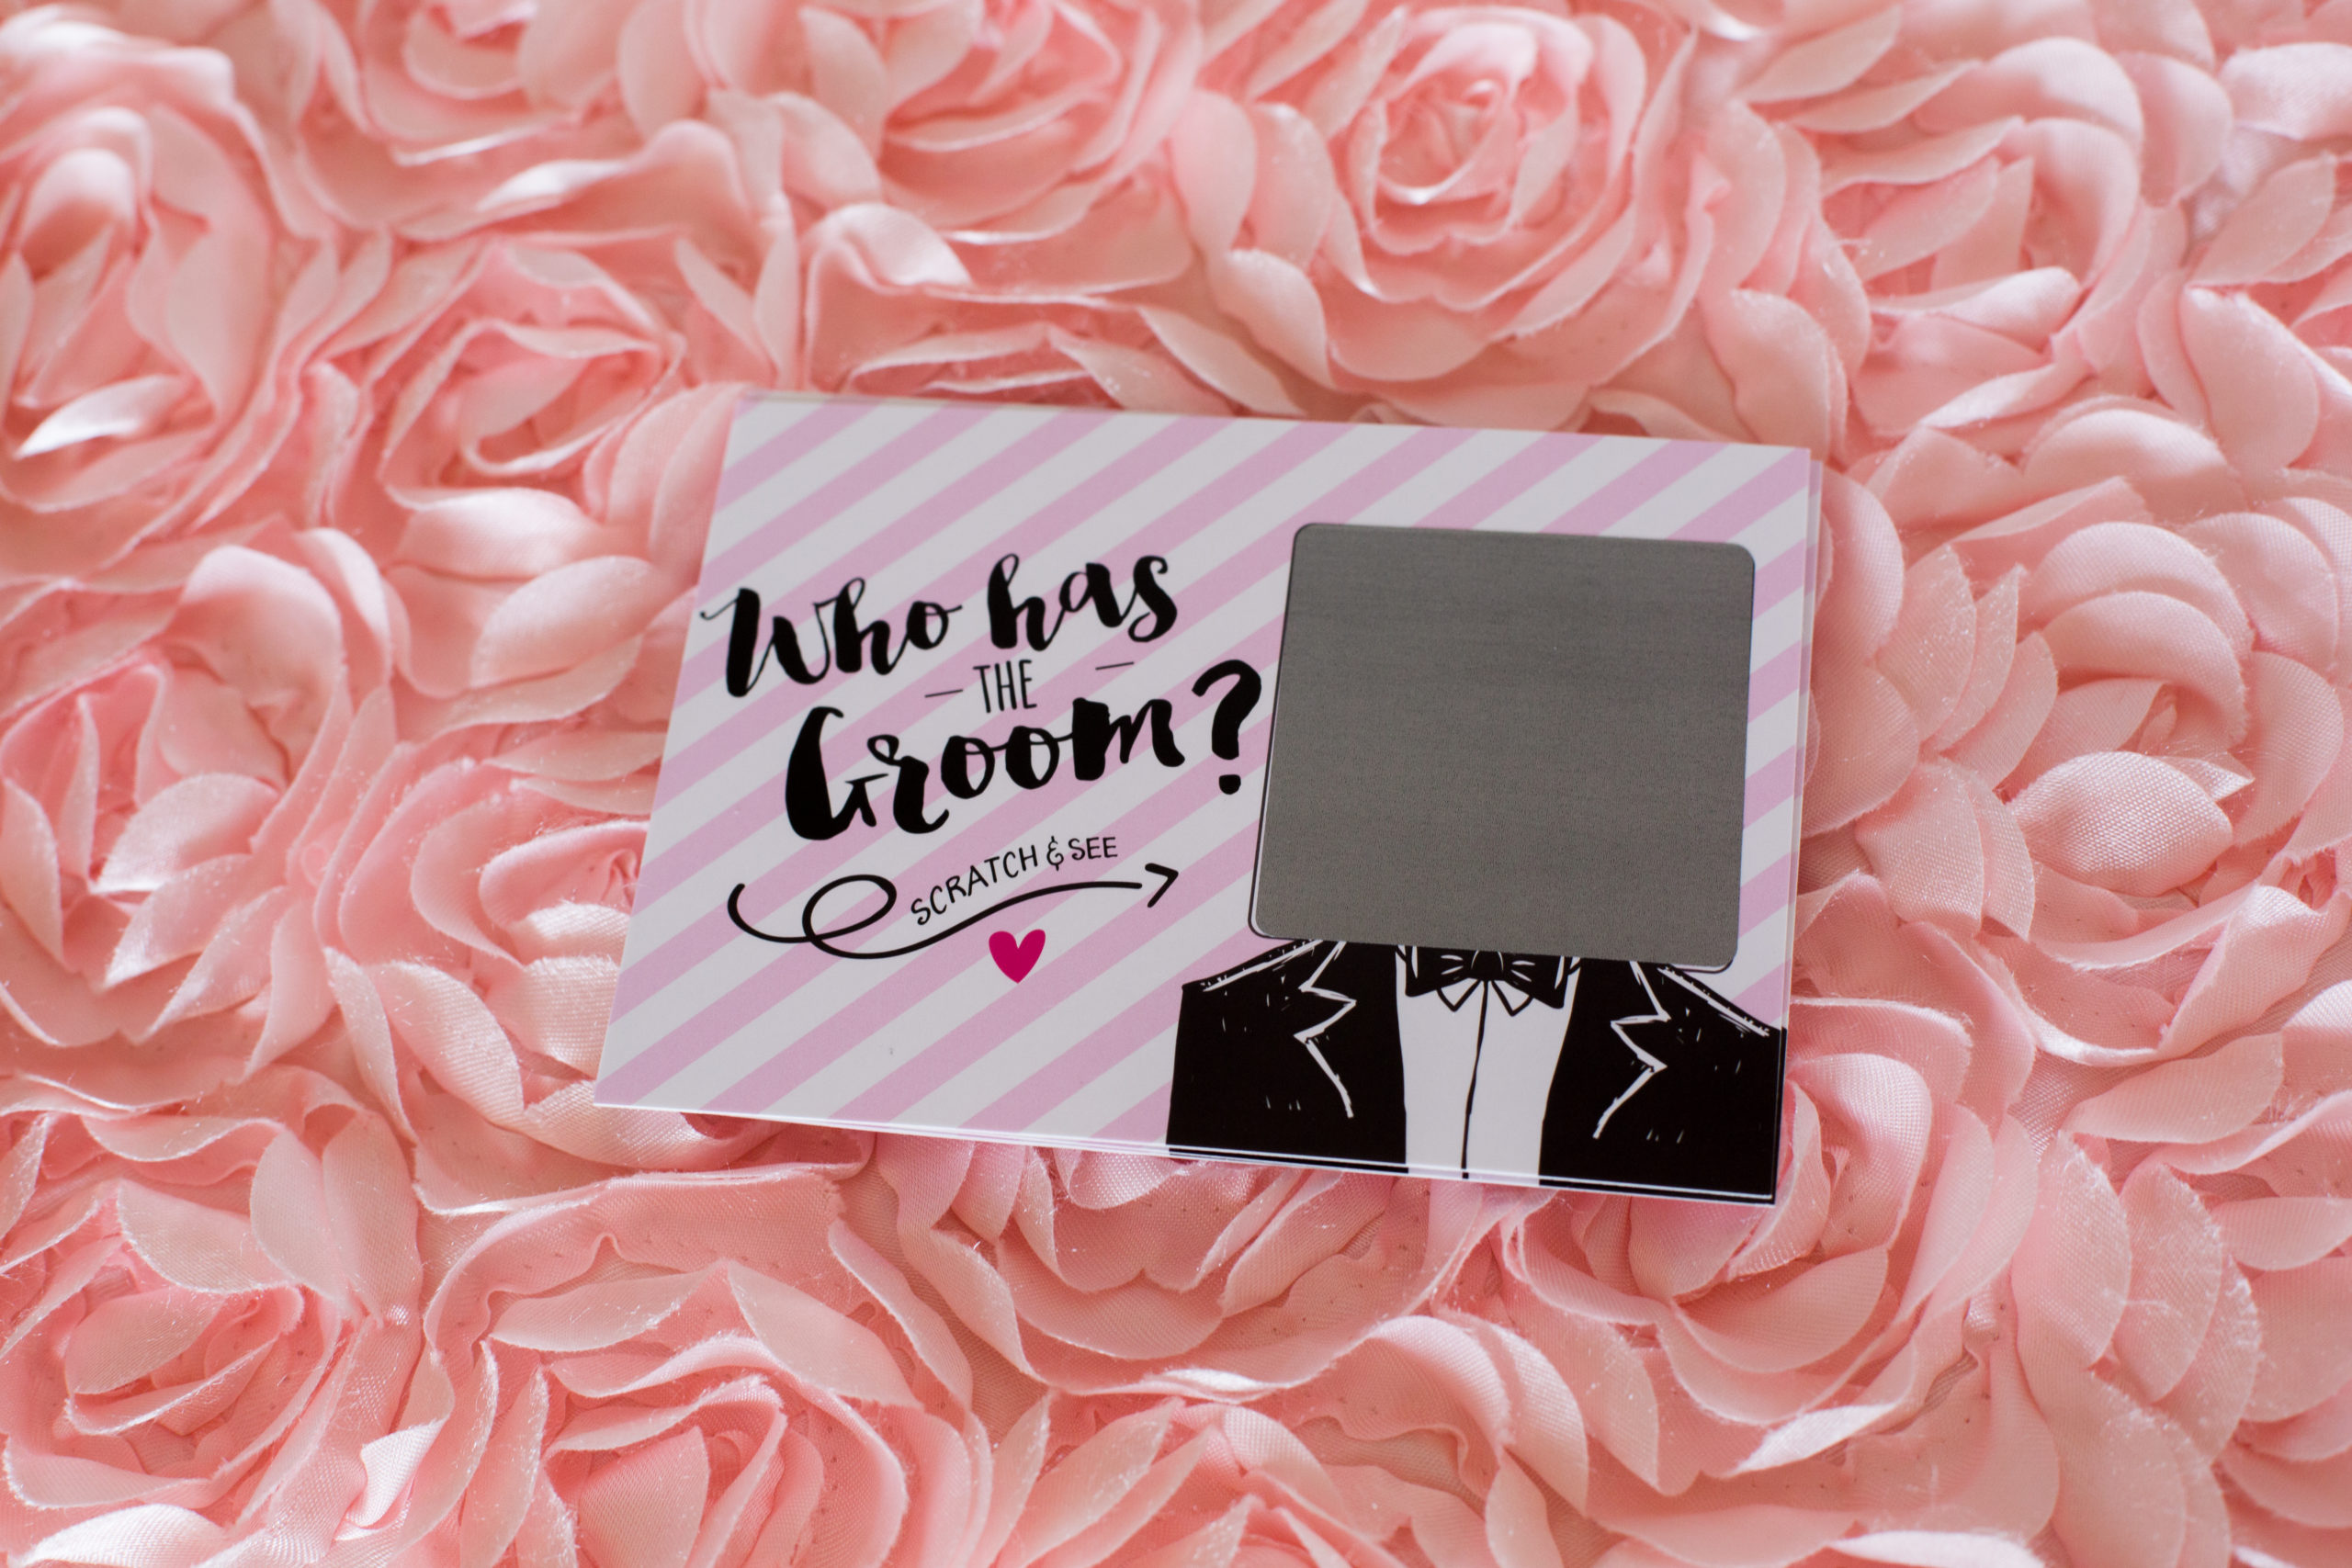 The most unique bridal shower game that you've never seen before! Who has the groom? scratch off